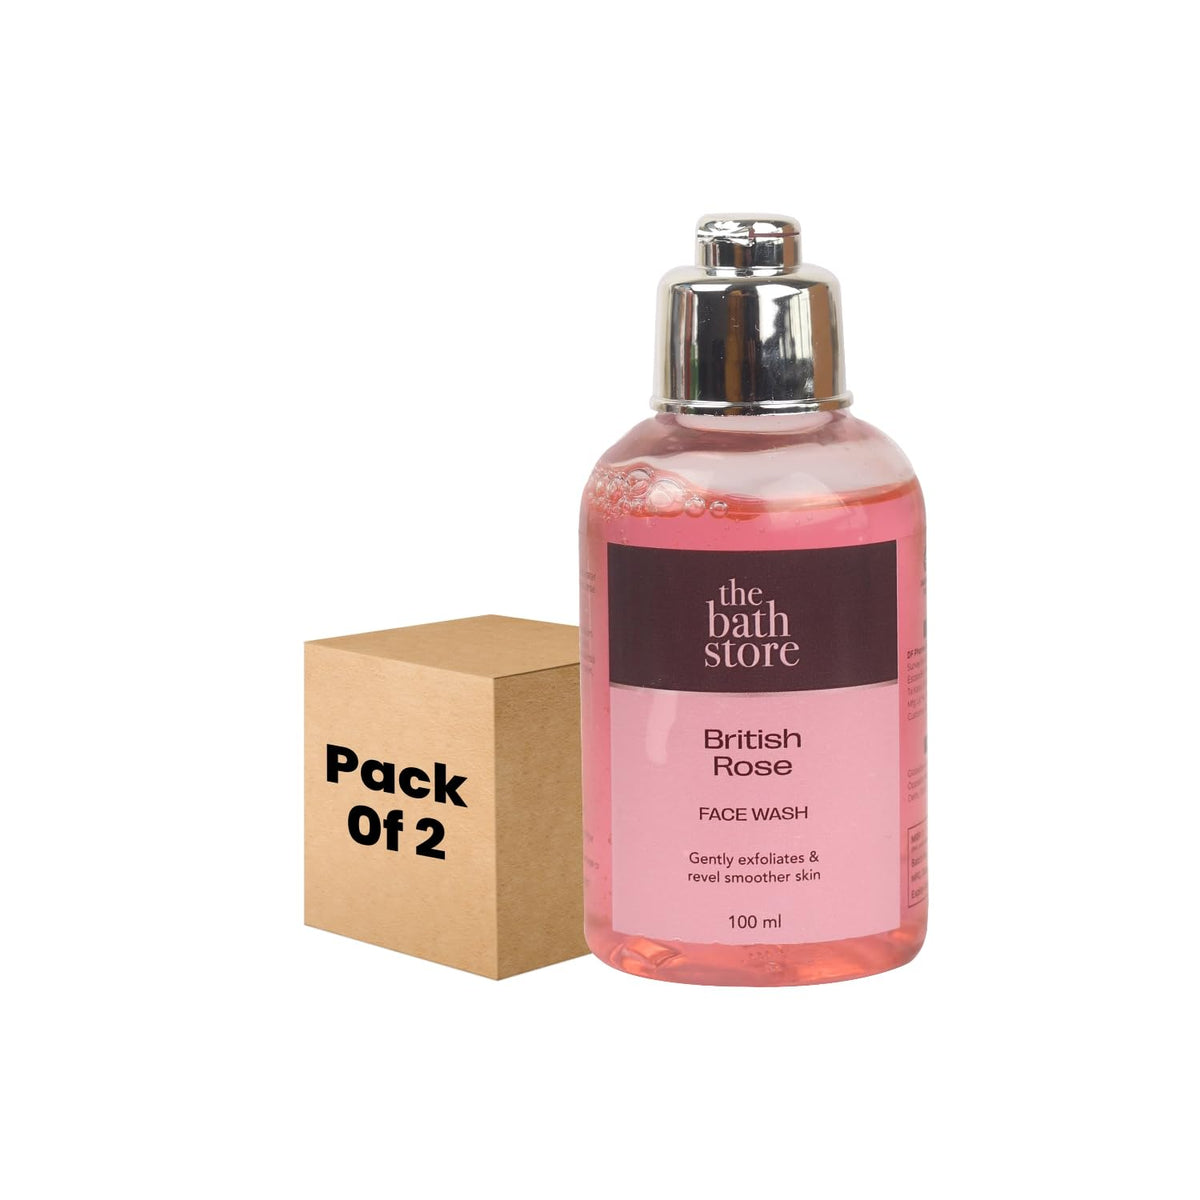 The Bath Store British Rose Face Wash - Gentle Exfoliation | Deep Cleansing - 100ml (Pack of 2)